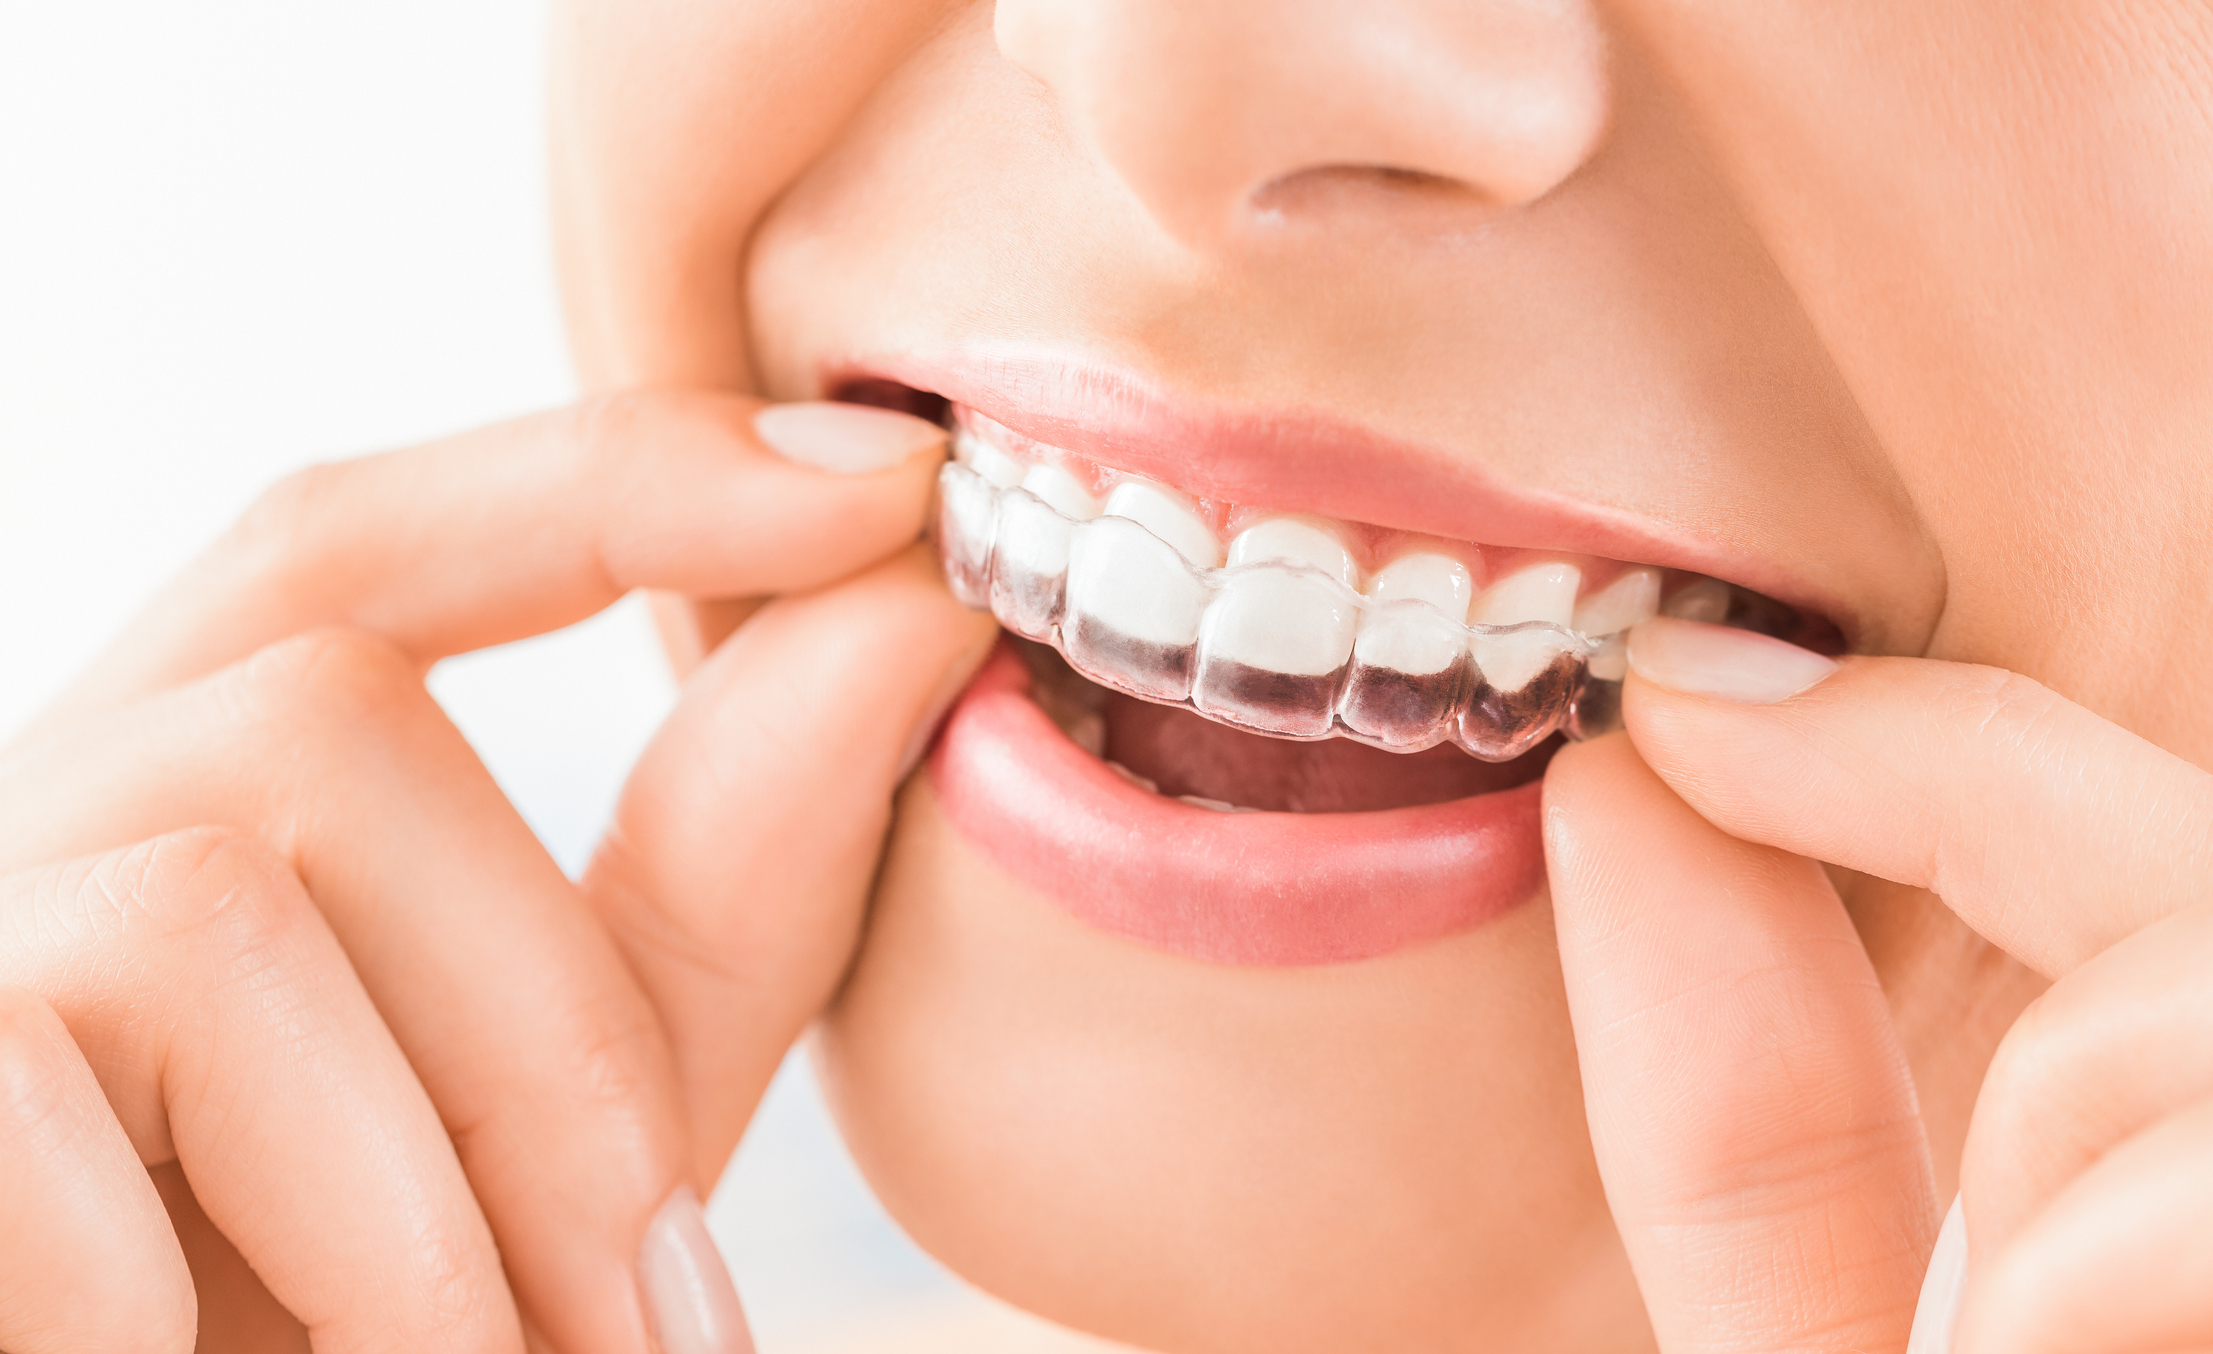 How Does Invisalign Treatment Work